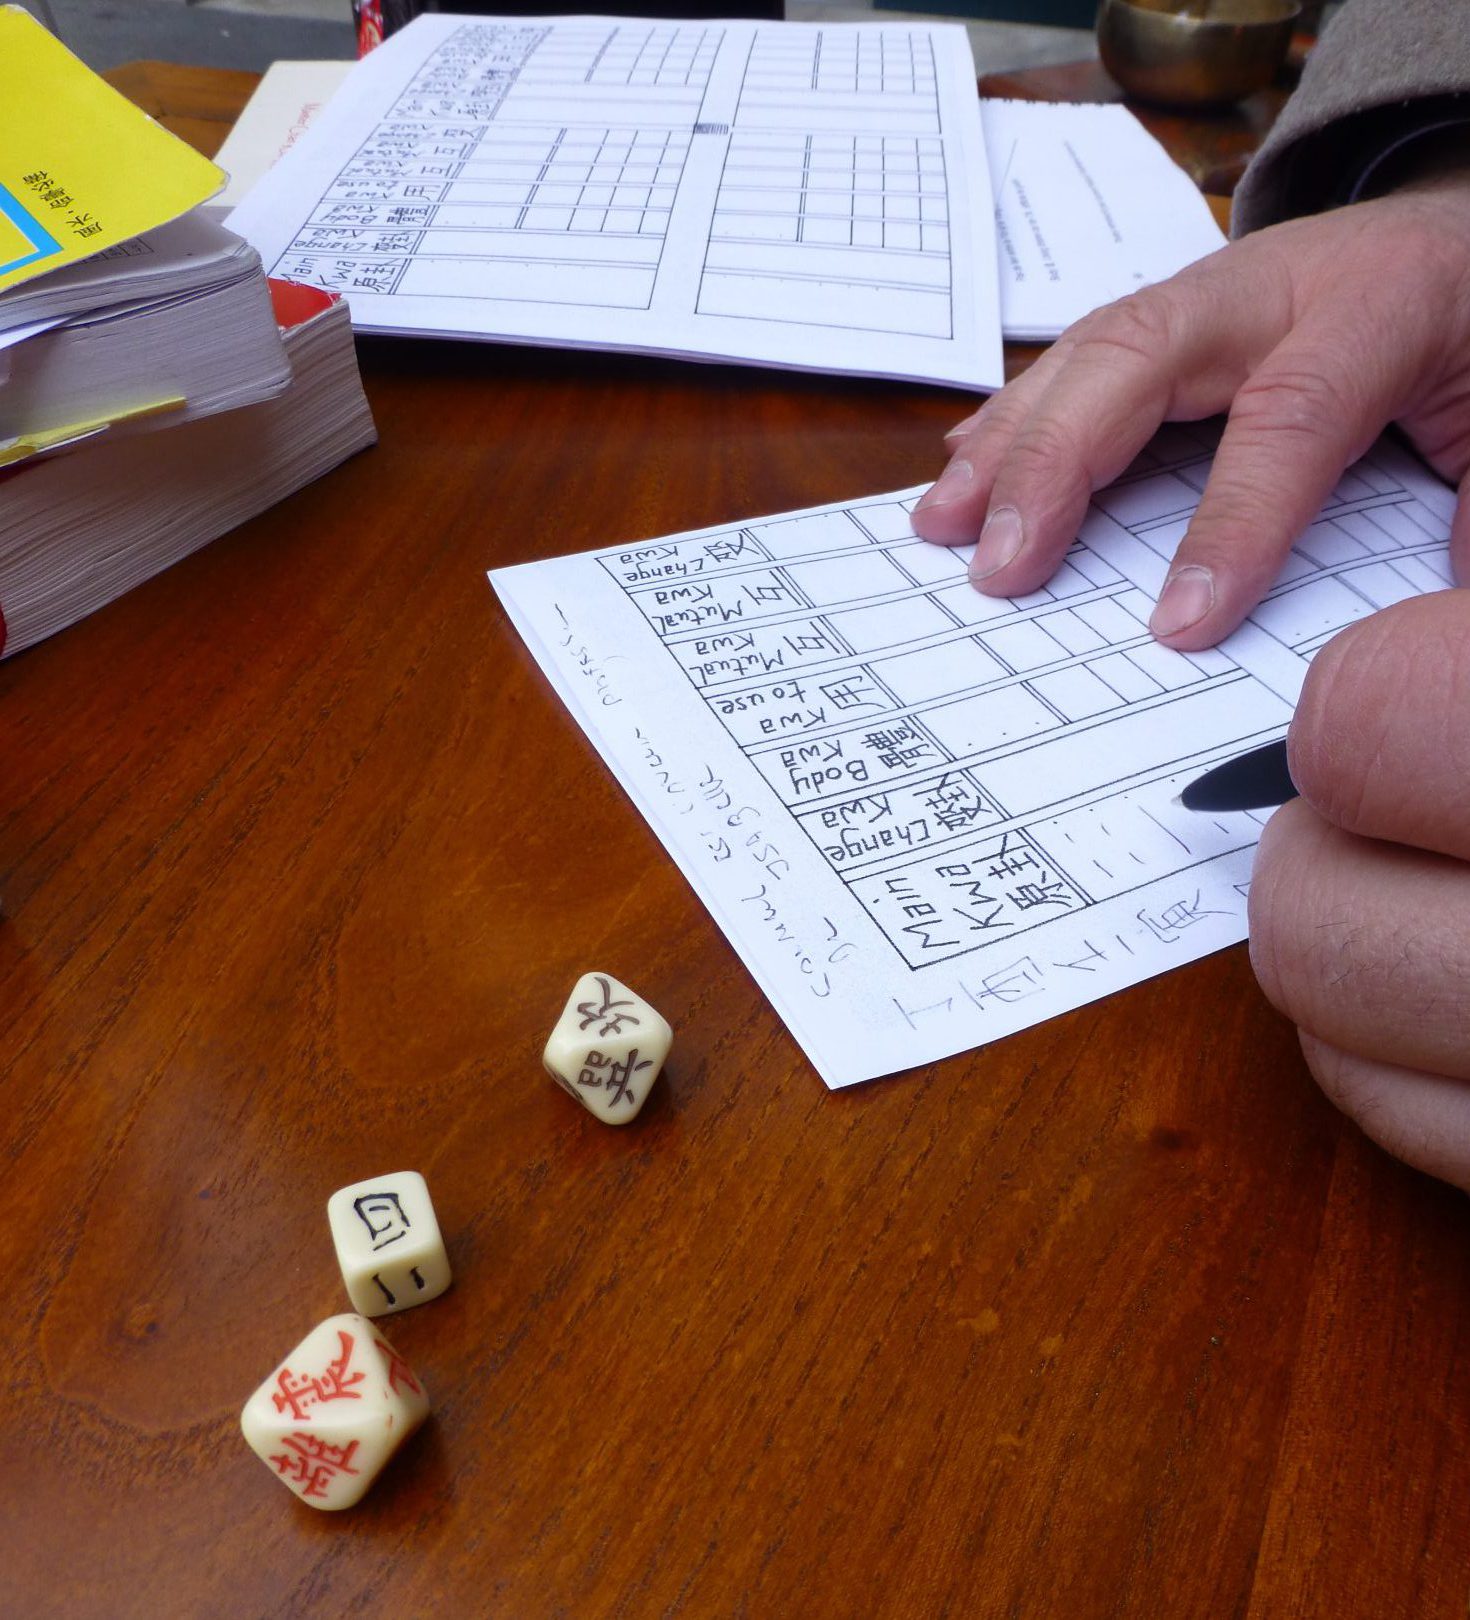 I-Ching Dice Prediction (Part II)